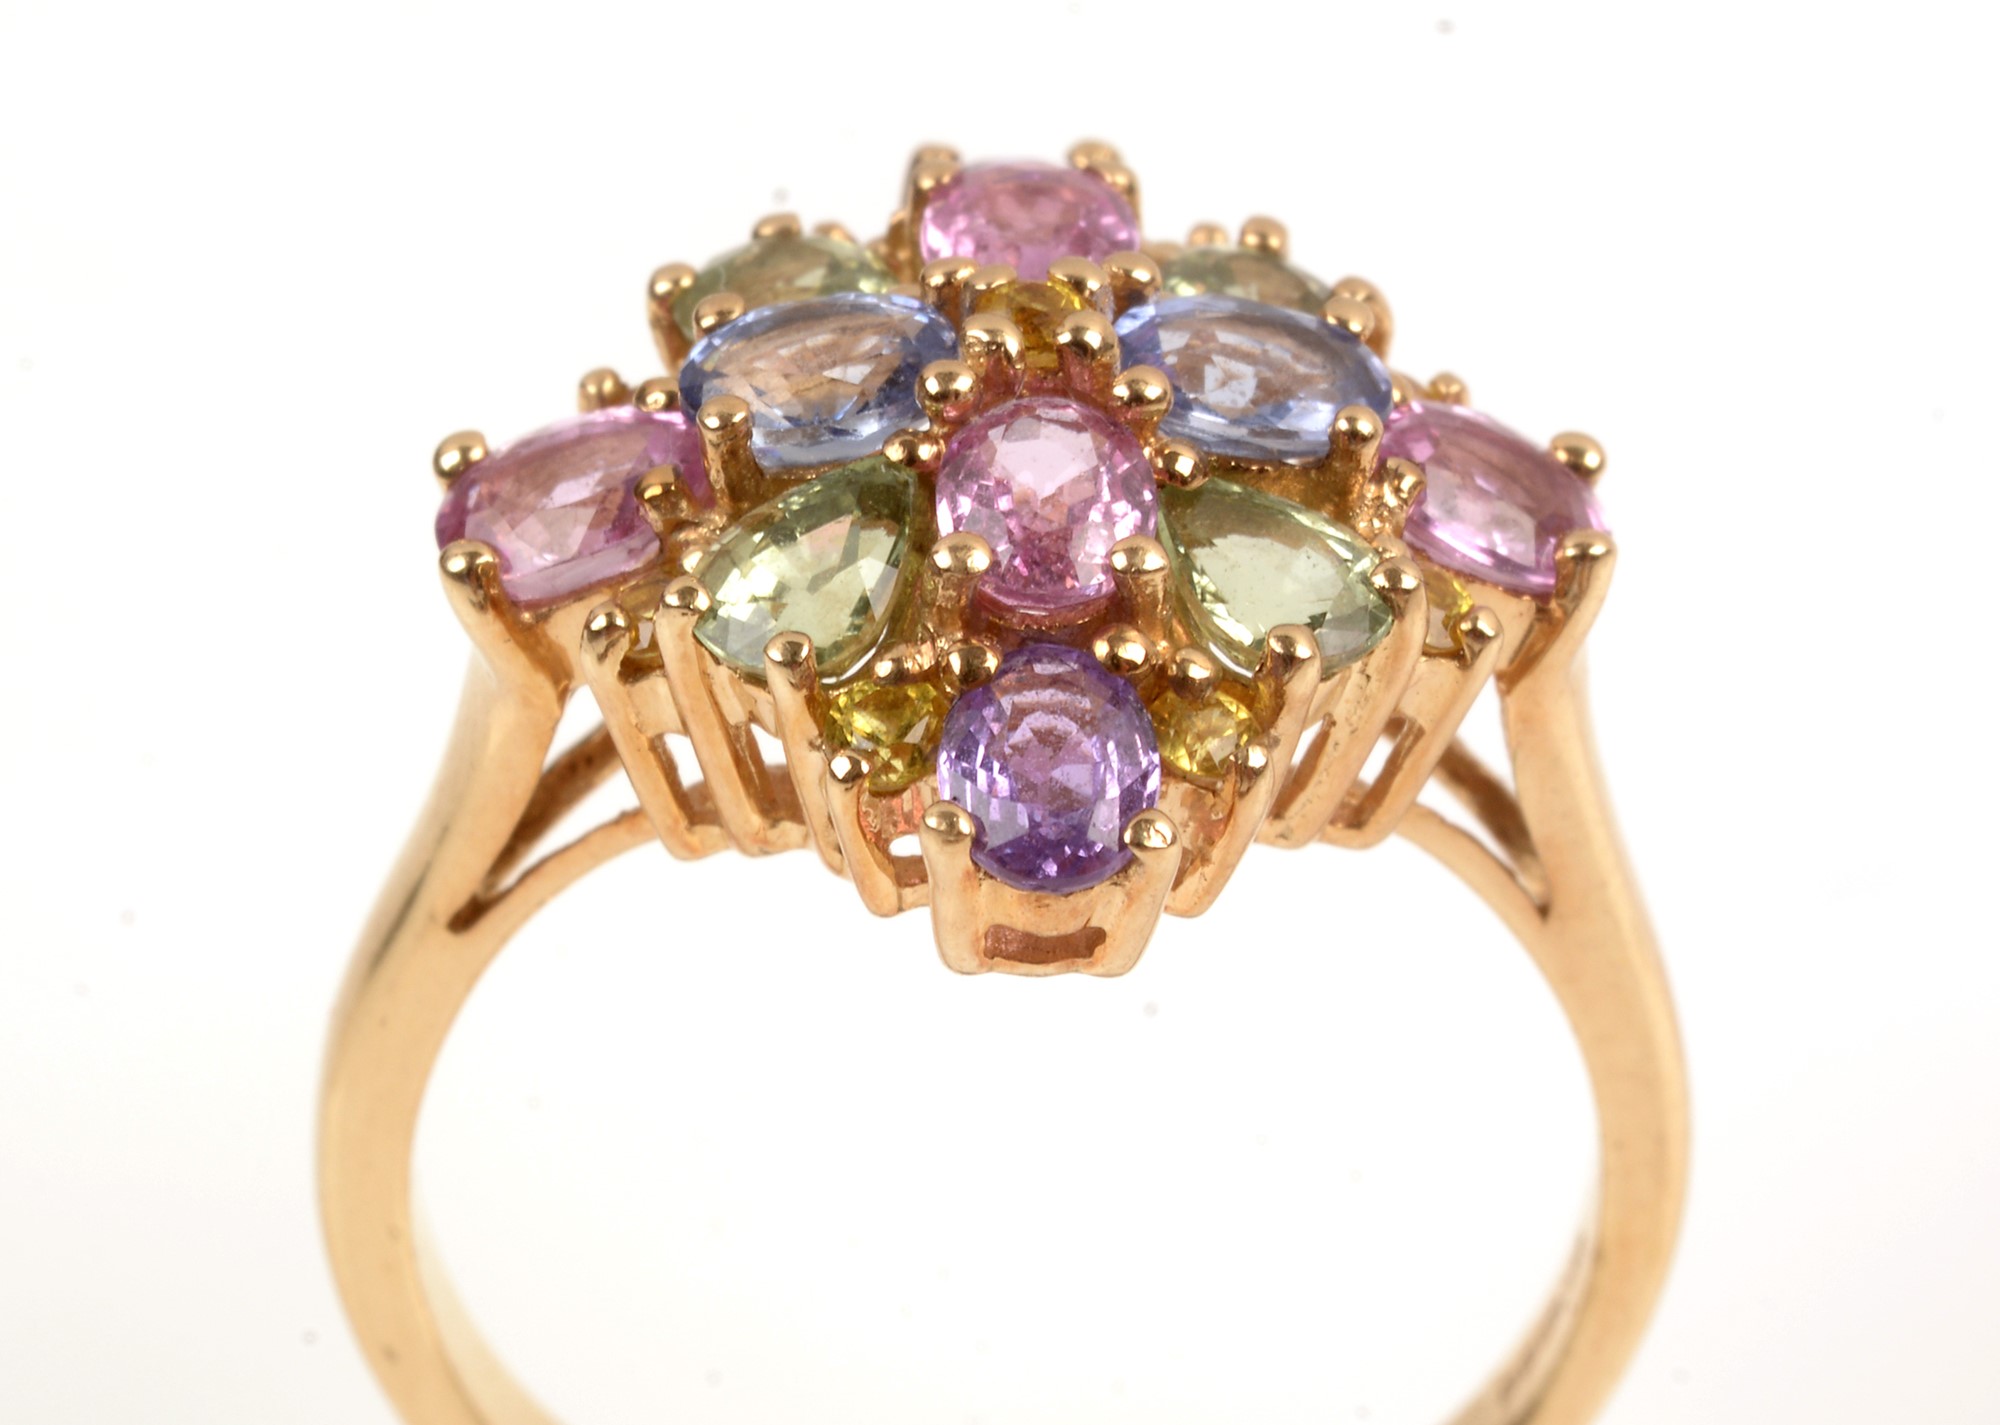 Coloured sapphire ring - Image 2 of 2